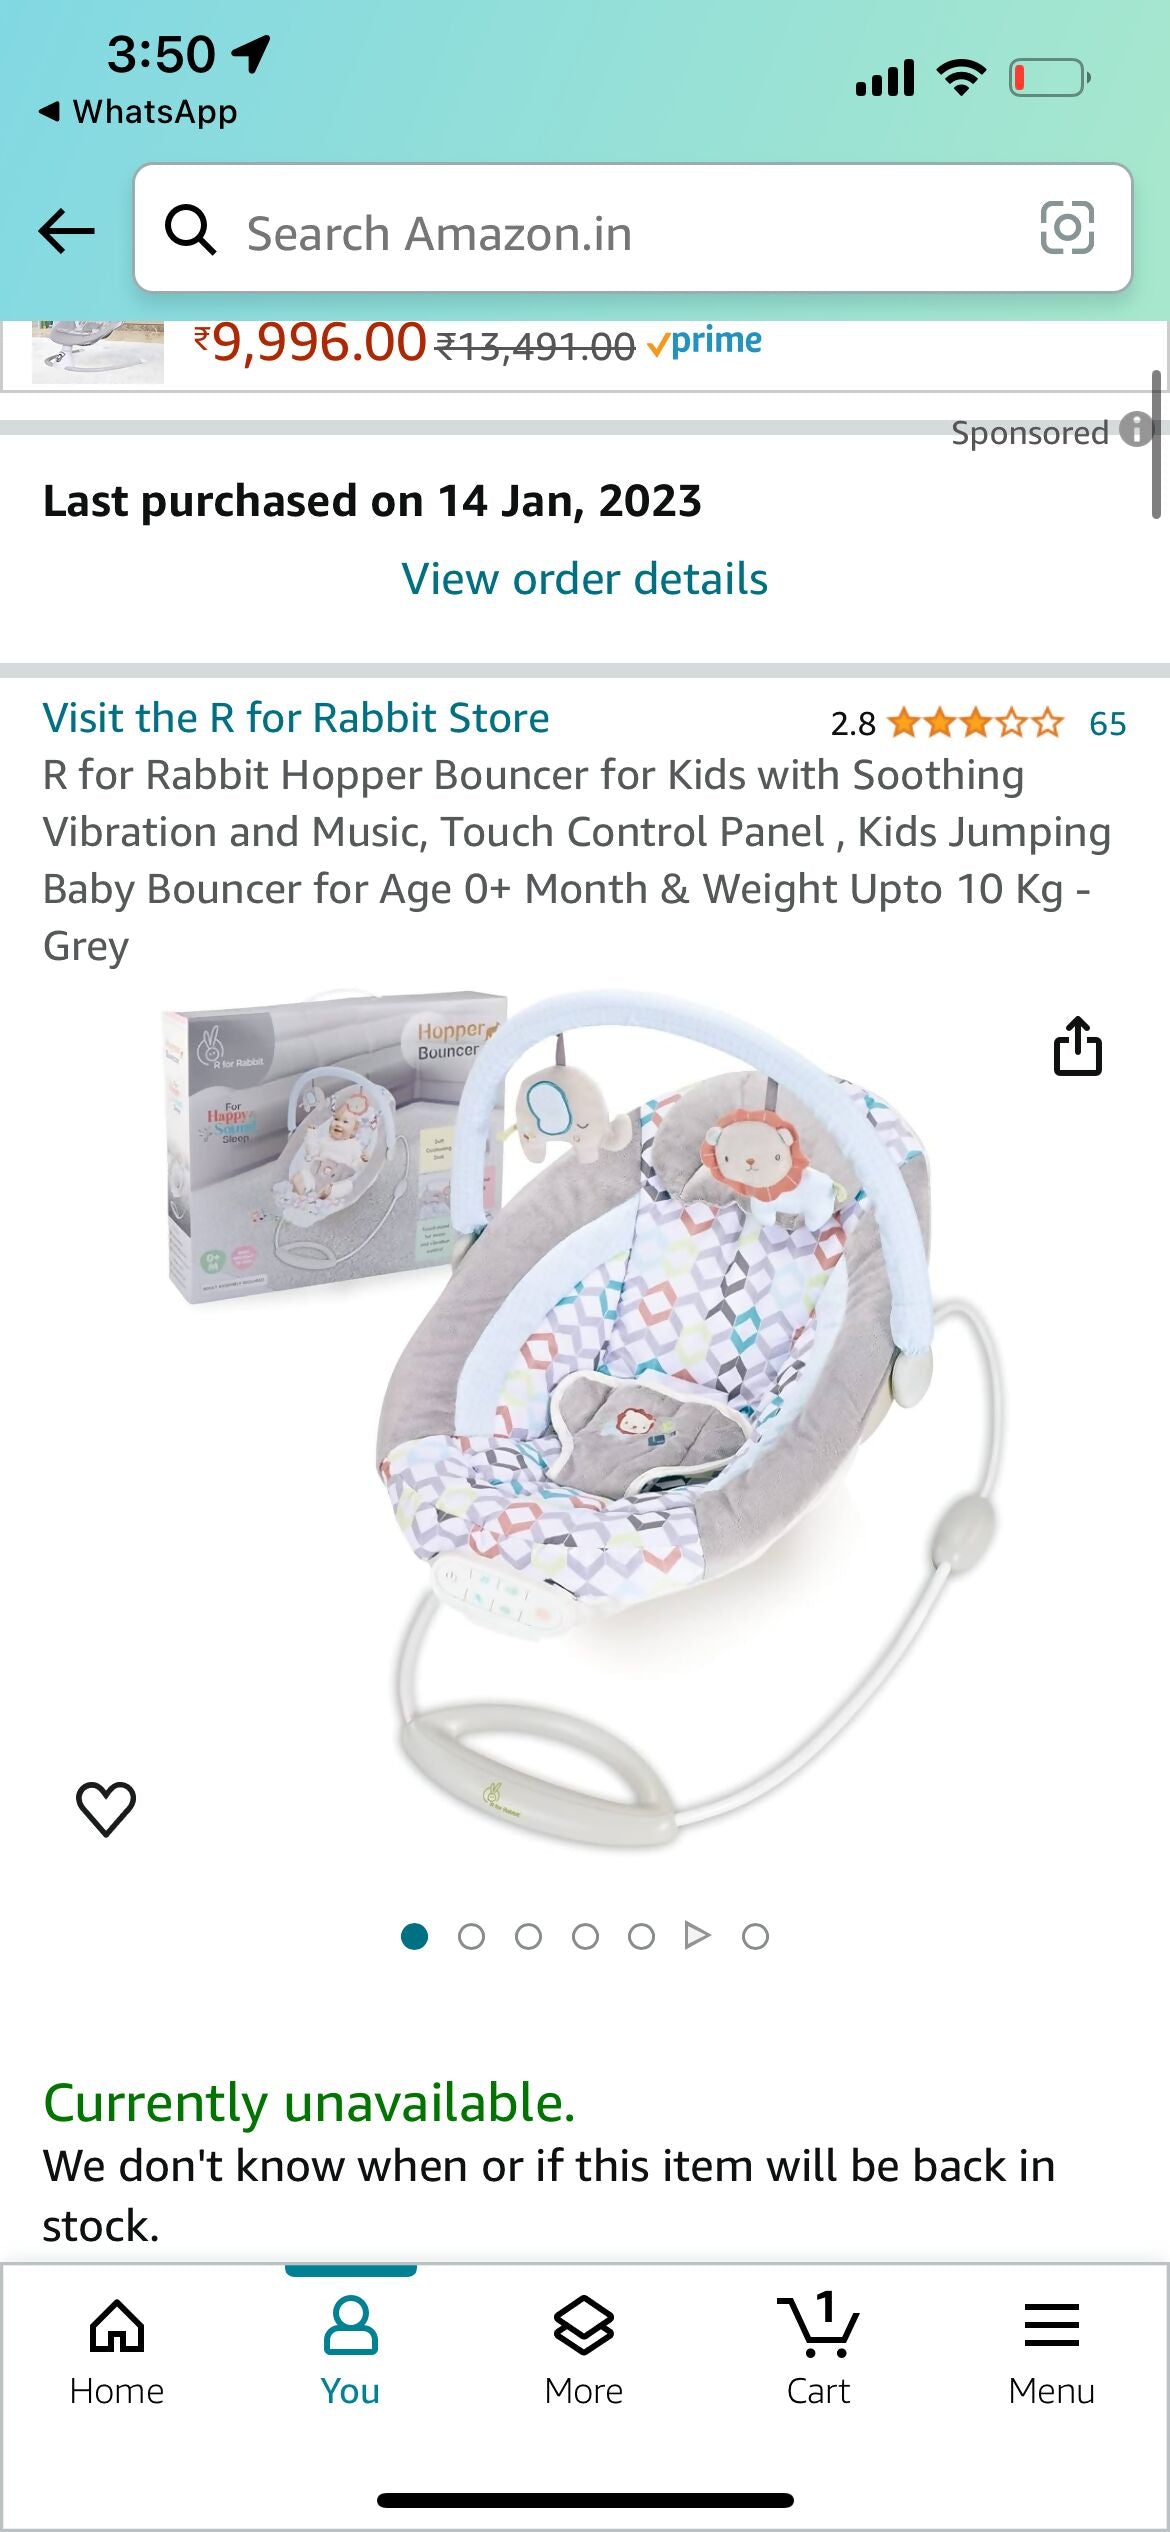 R FOR RABBIT hopper bouncer for kids with soothing vibration and music - PyaraBaby